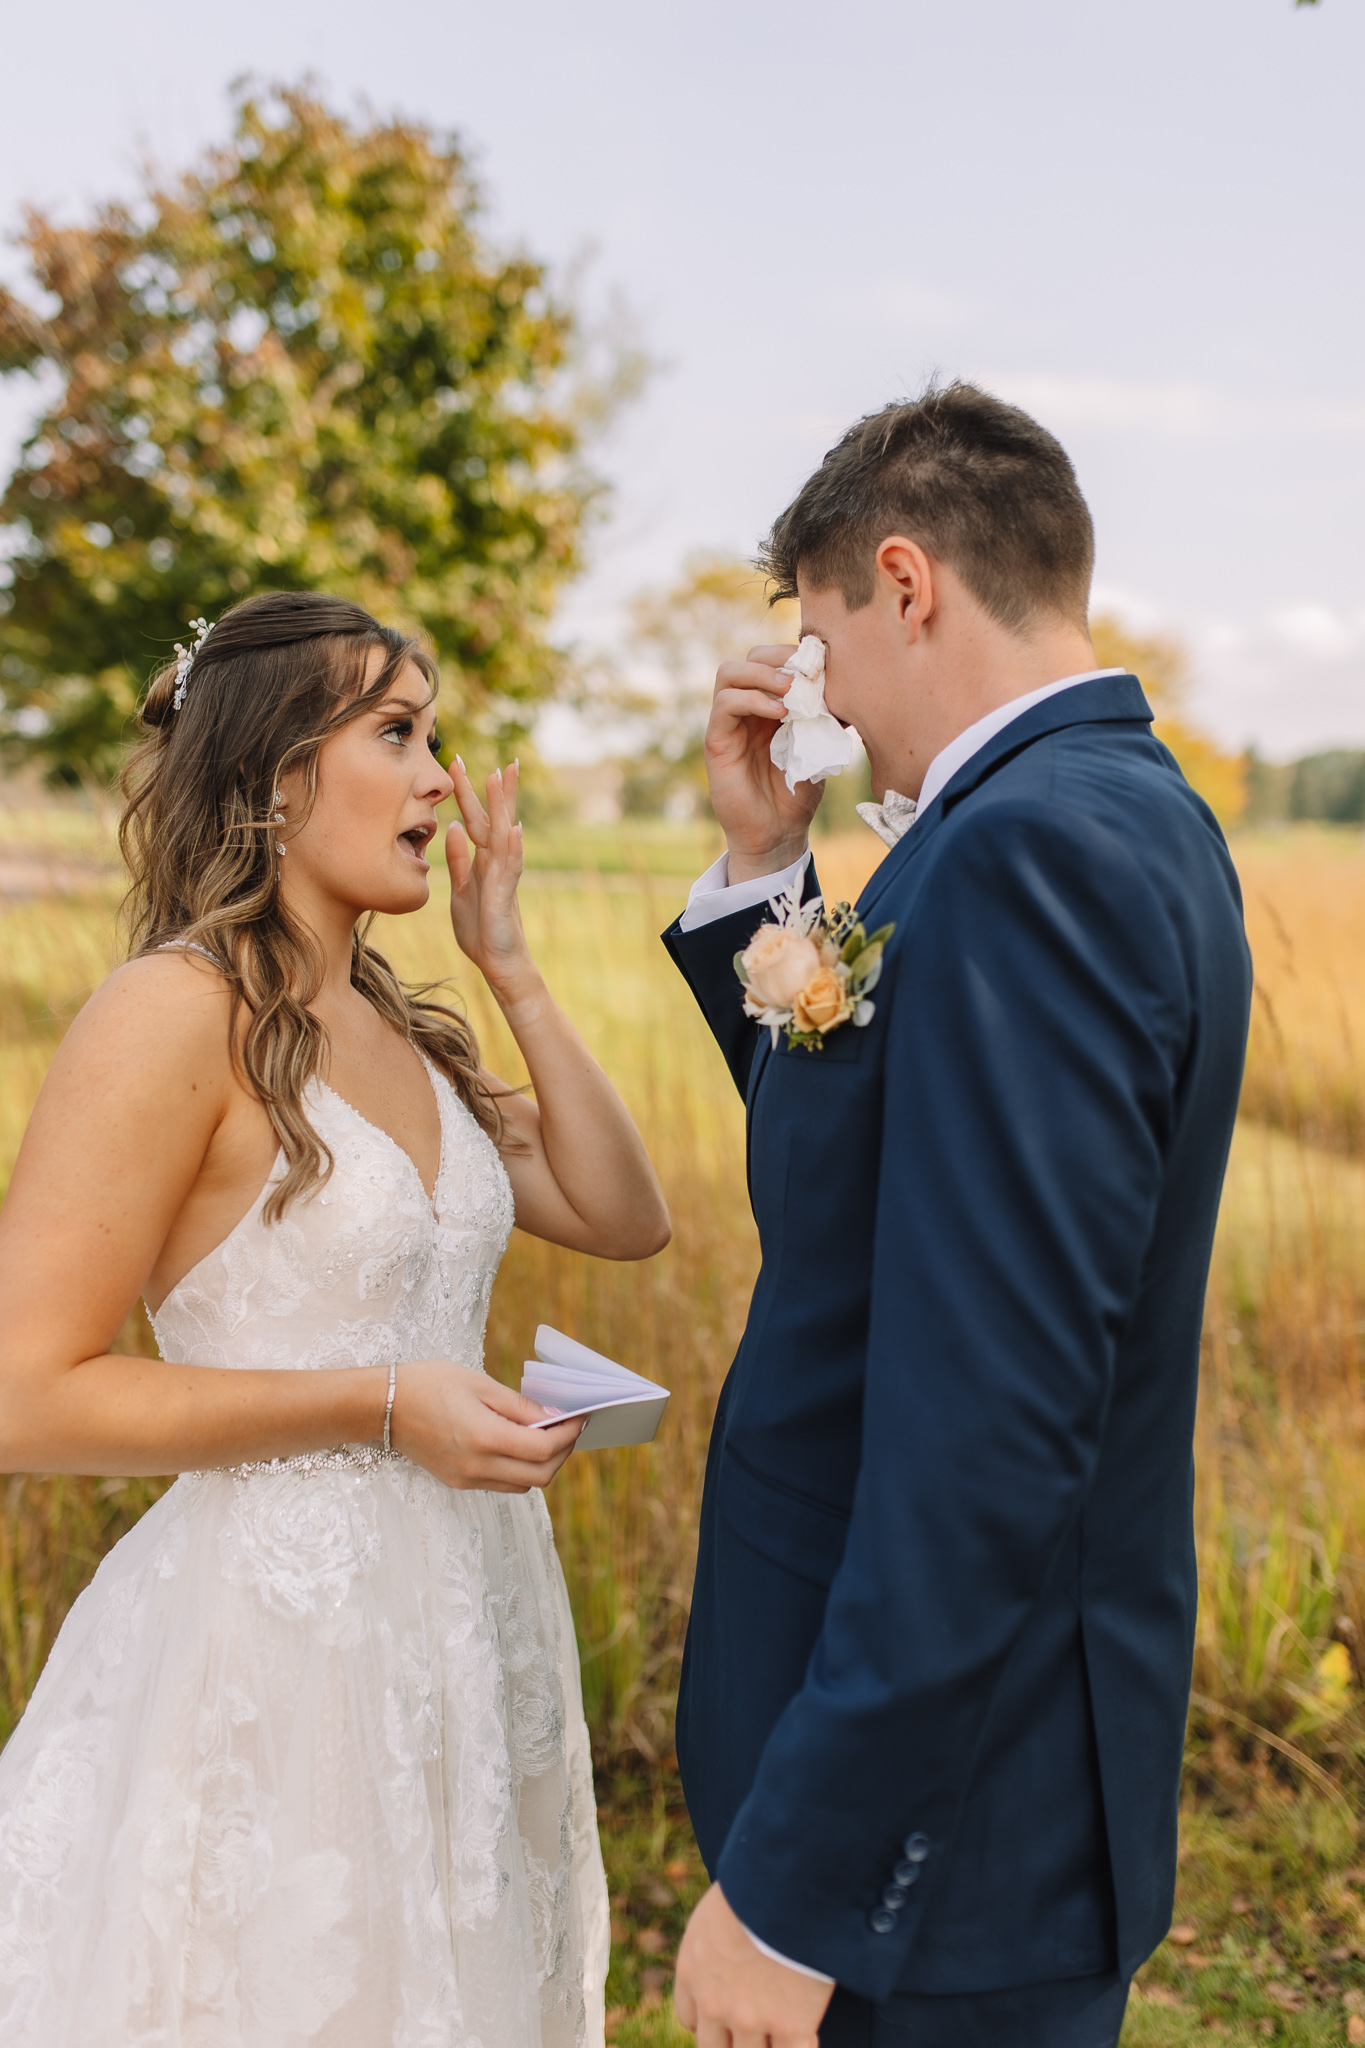 Emotional bride and groom exchanging private vows in a field with trees in Minnesota